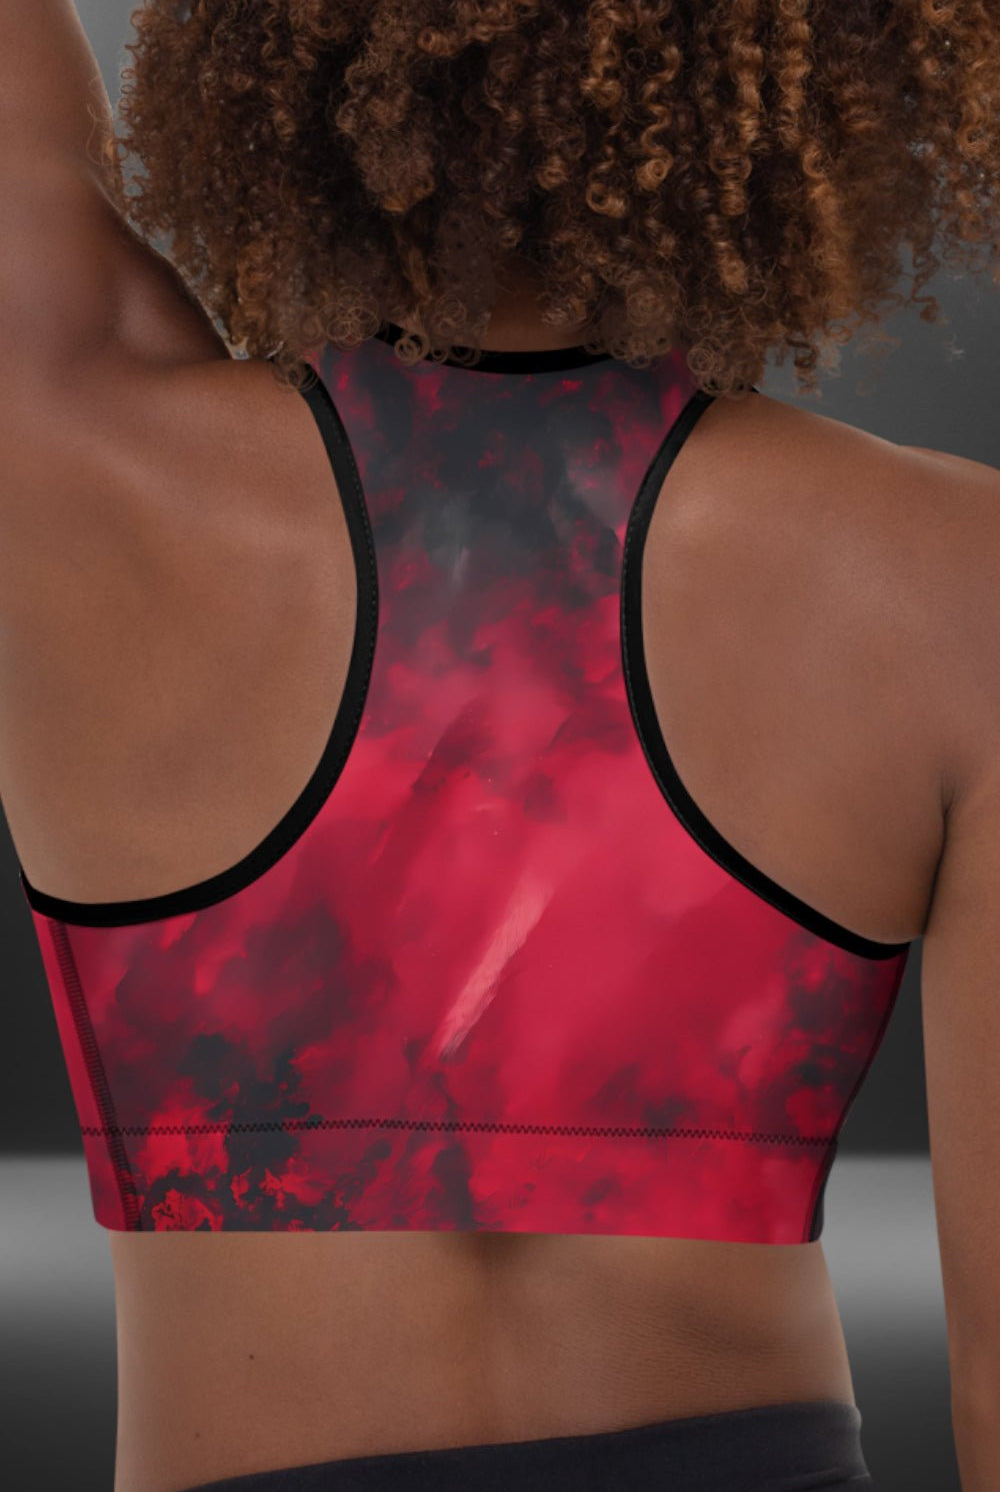 Dragon Foxx™ Red and Black Particle Grunge Padded Sports Bra - Dragon Foxx™ Padded Sports Bra - DRAGON FOXX™ - Dragon Foxx™ Red and Black Particle Grunge Padded Sports Bra - 6390448_10862 - XS - Red / Black - Dragon Foxx™ - Dragon Foxx™ Padded Sports Bra - Dragon Foxx™ Red and Black Grunge Padded Sports Bra